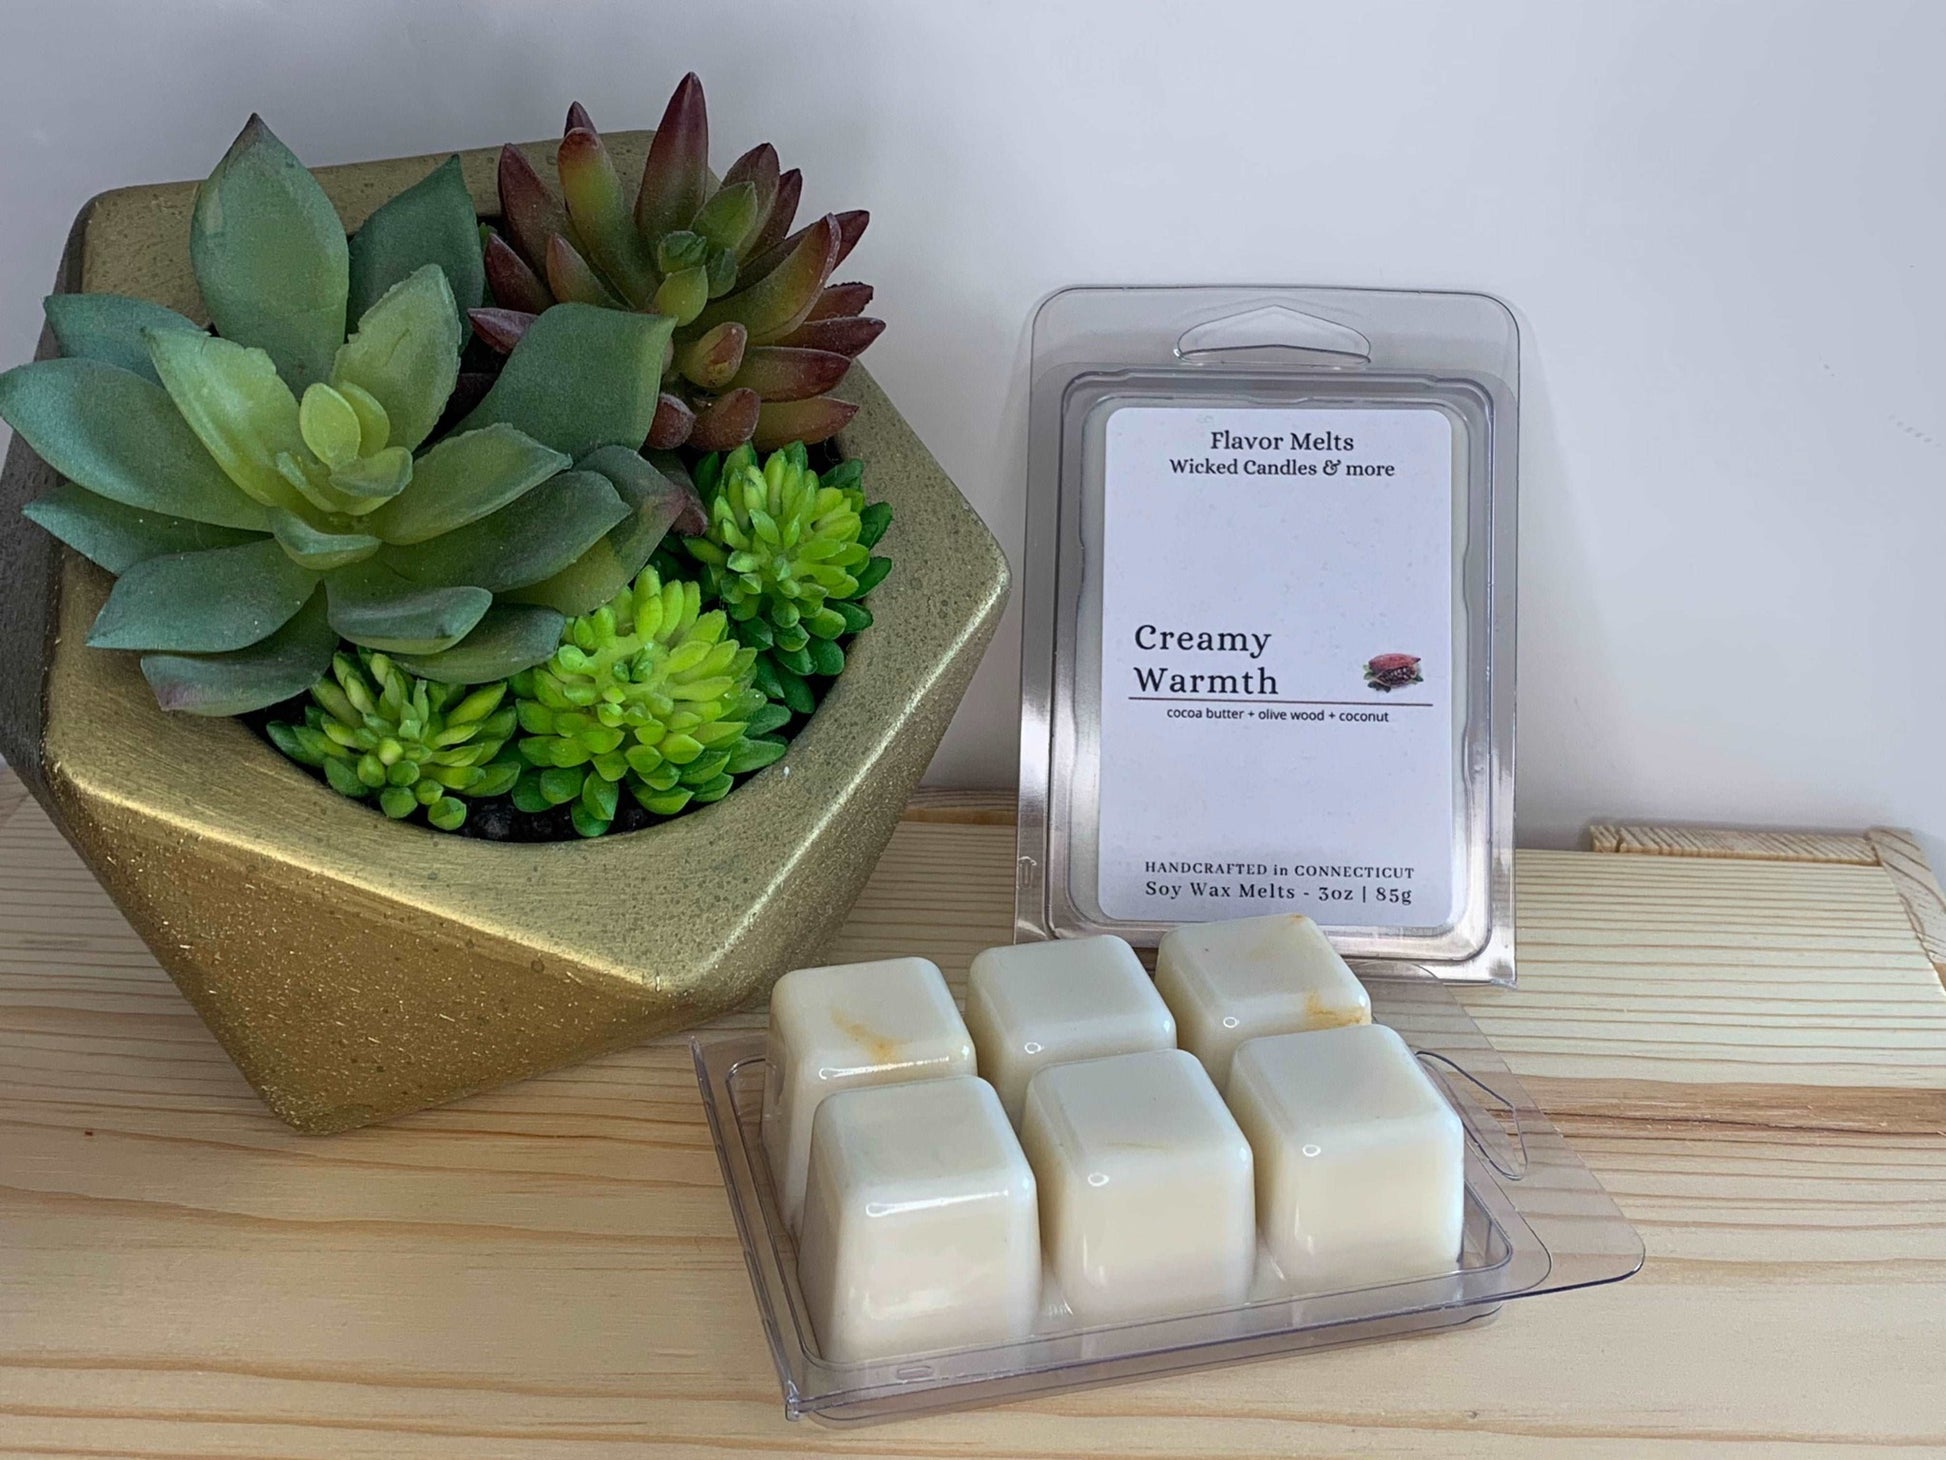 Creamy Warmth Scented Soy Wax Melt